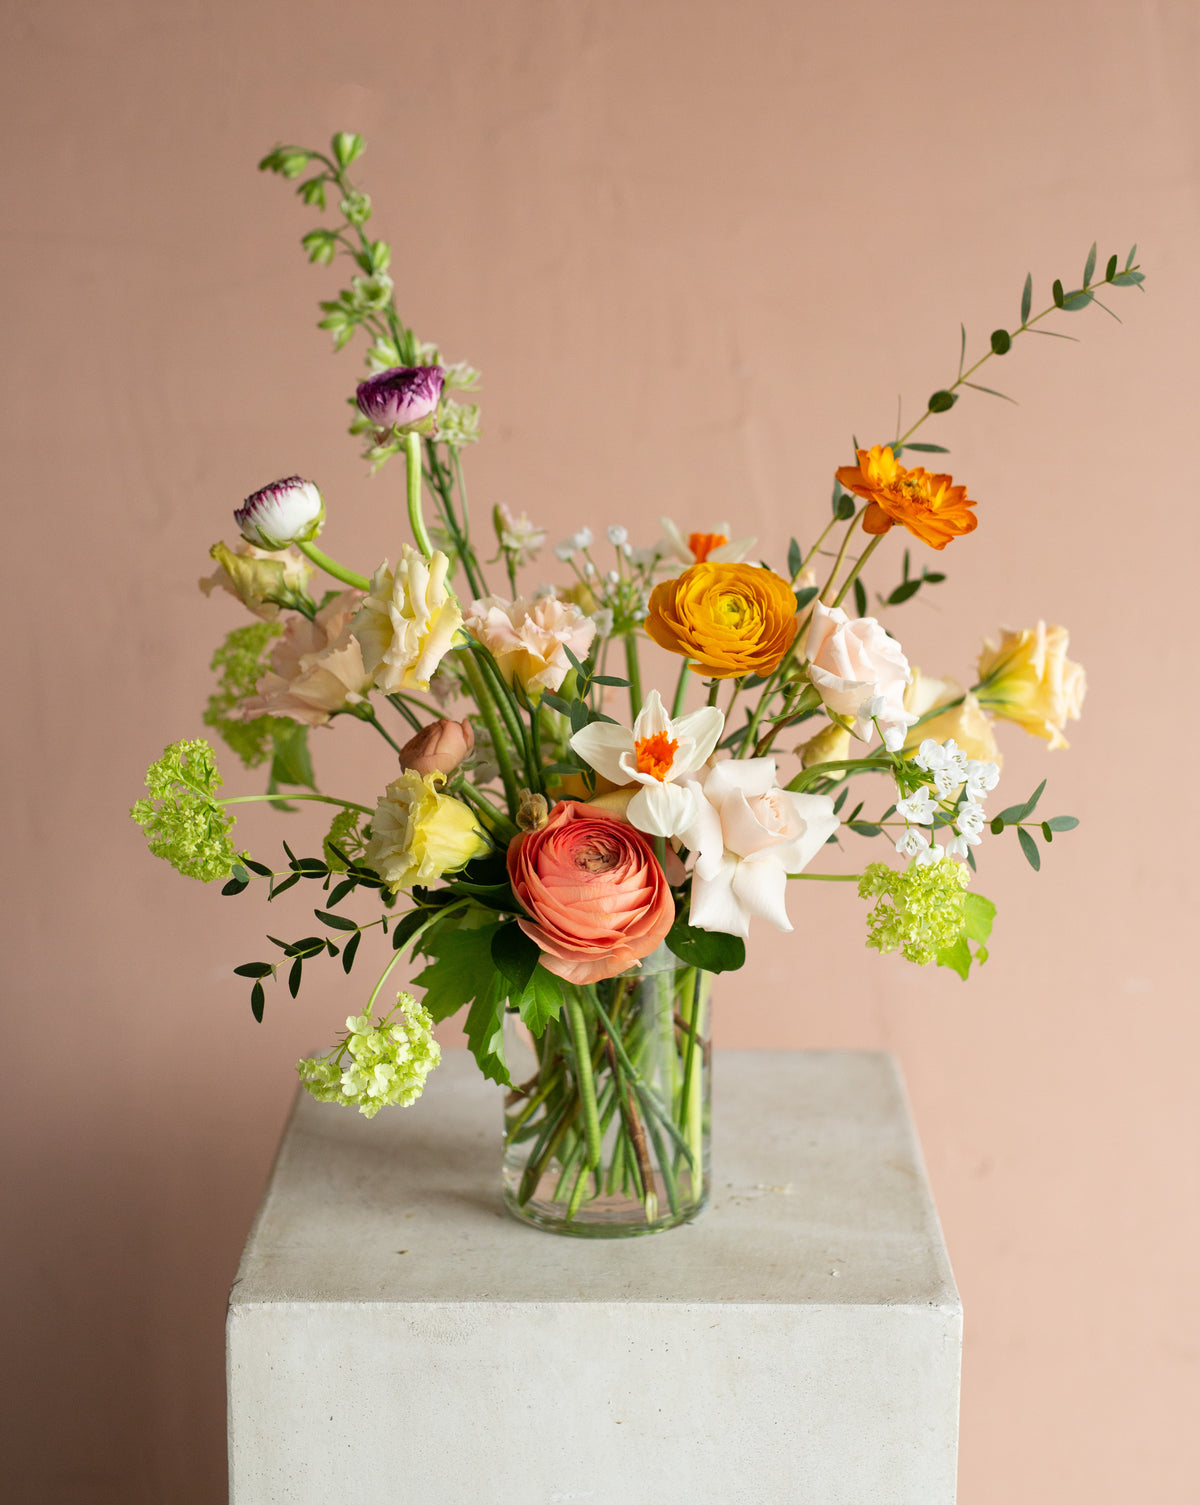 Dried Flowers - Where To Buy Dried Flower Bouquets & Arrangement Tips